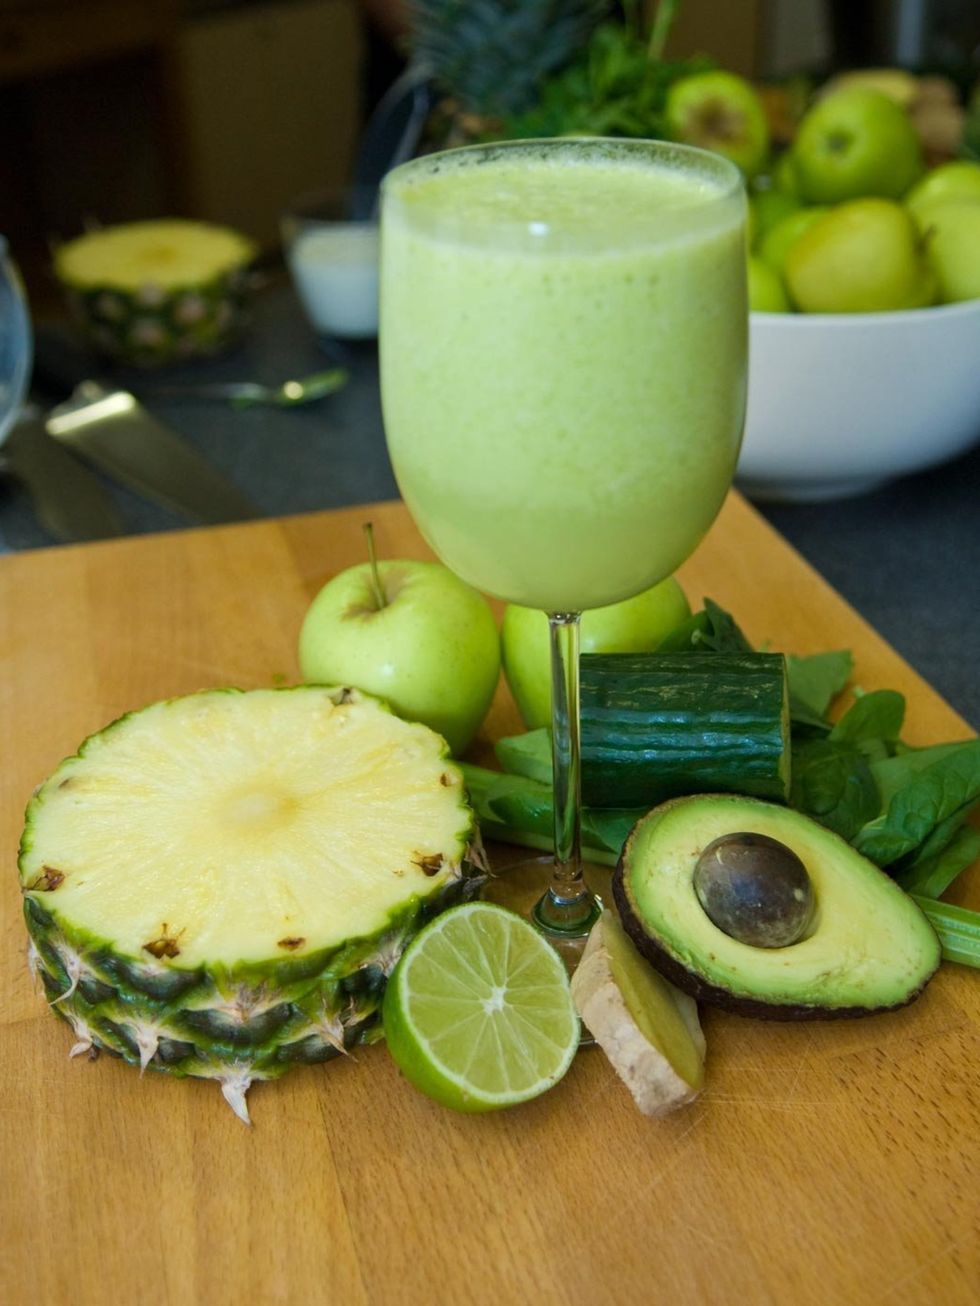 <p>[1] <a href="http://www.elleuk.com/beauty/diet-fitness/diet-features/jason-vale-s-juice-recipes">Ginger Shot</a> followed by <a href="http://www.elleuk.com/beauty/diet-fitness/diet-features/jason-vale-s-juice-recipes">Turbo with-a-Kick</a>!</p><p>[2] <